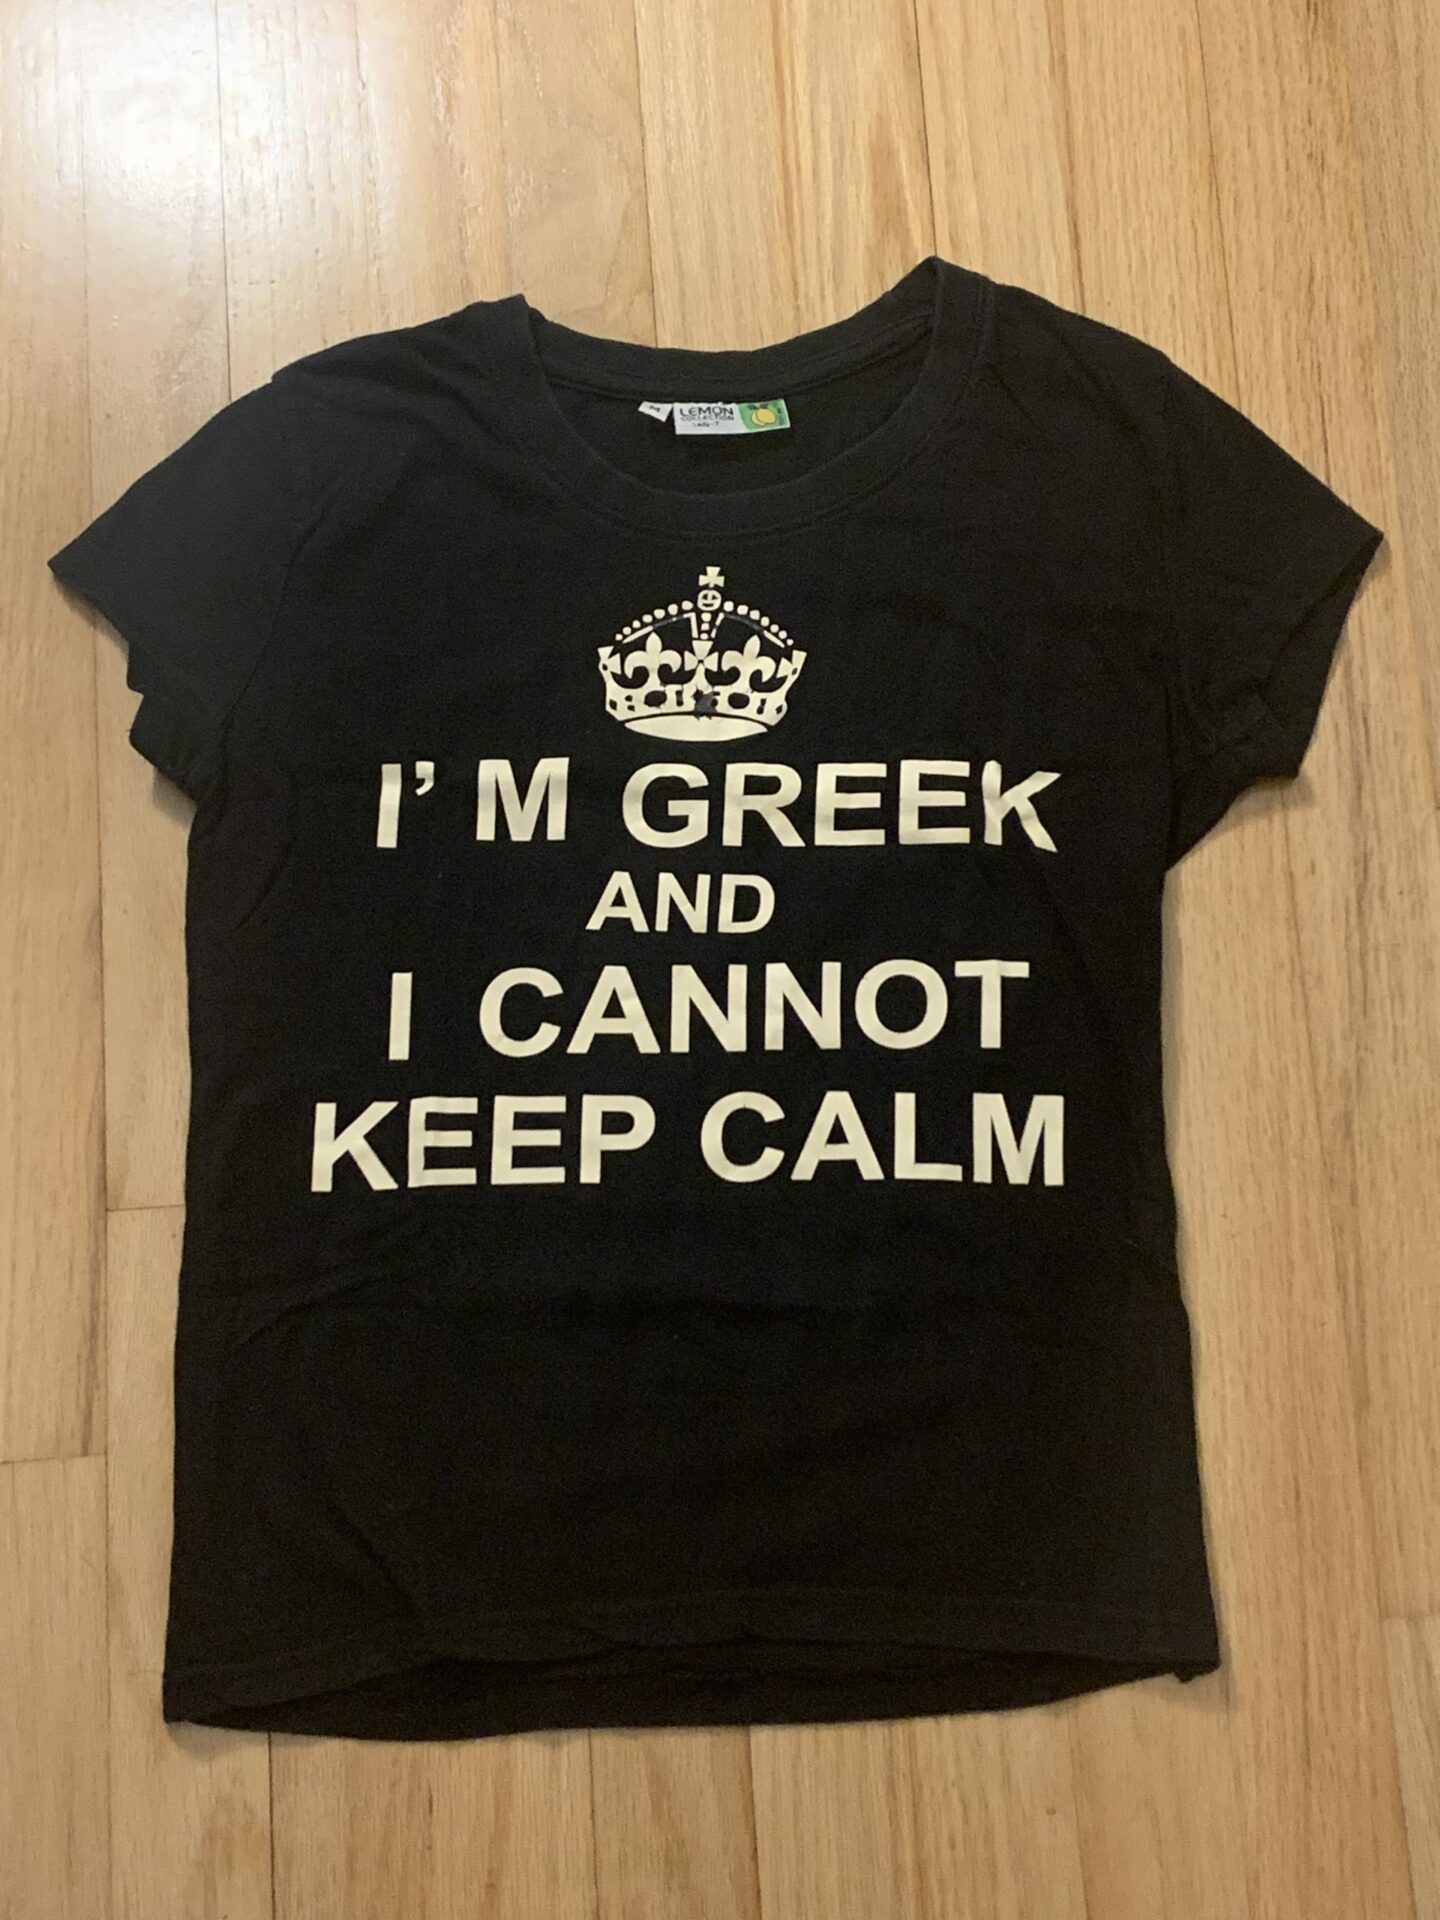 A black shirt with a crown printed at the top and the words "I'M GREEK AND I CANNOT KEEP CALM" printed below it